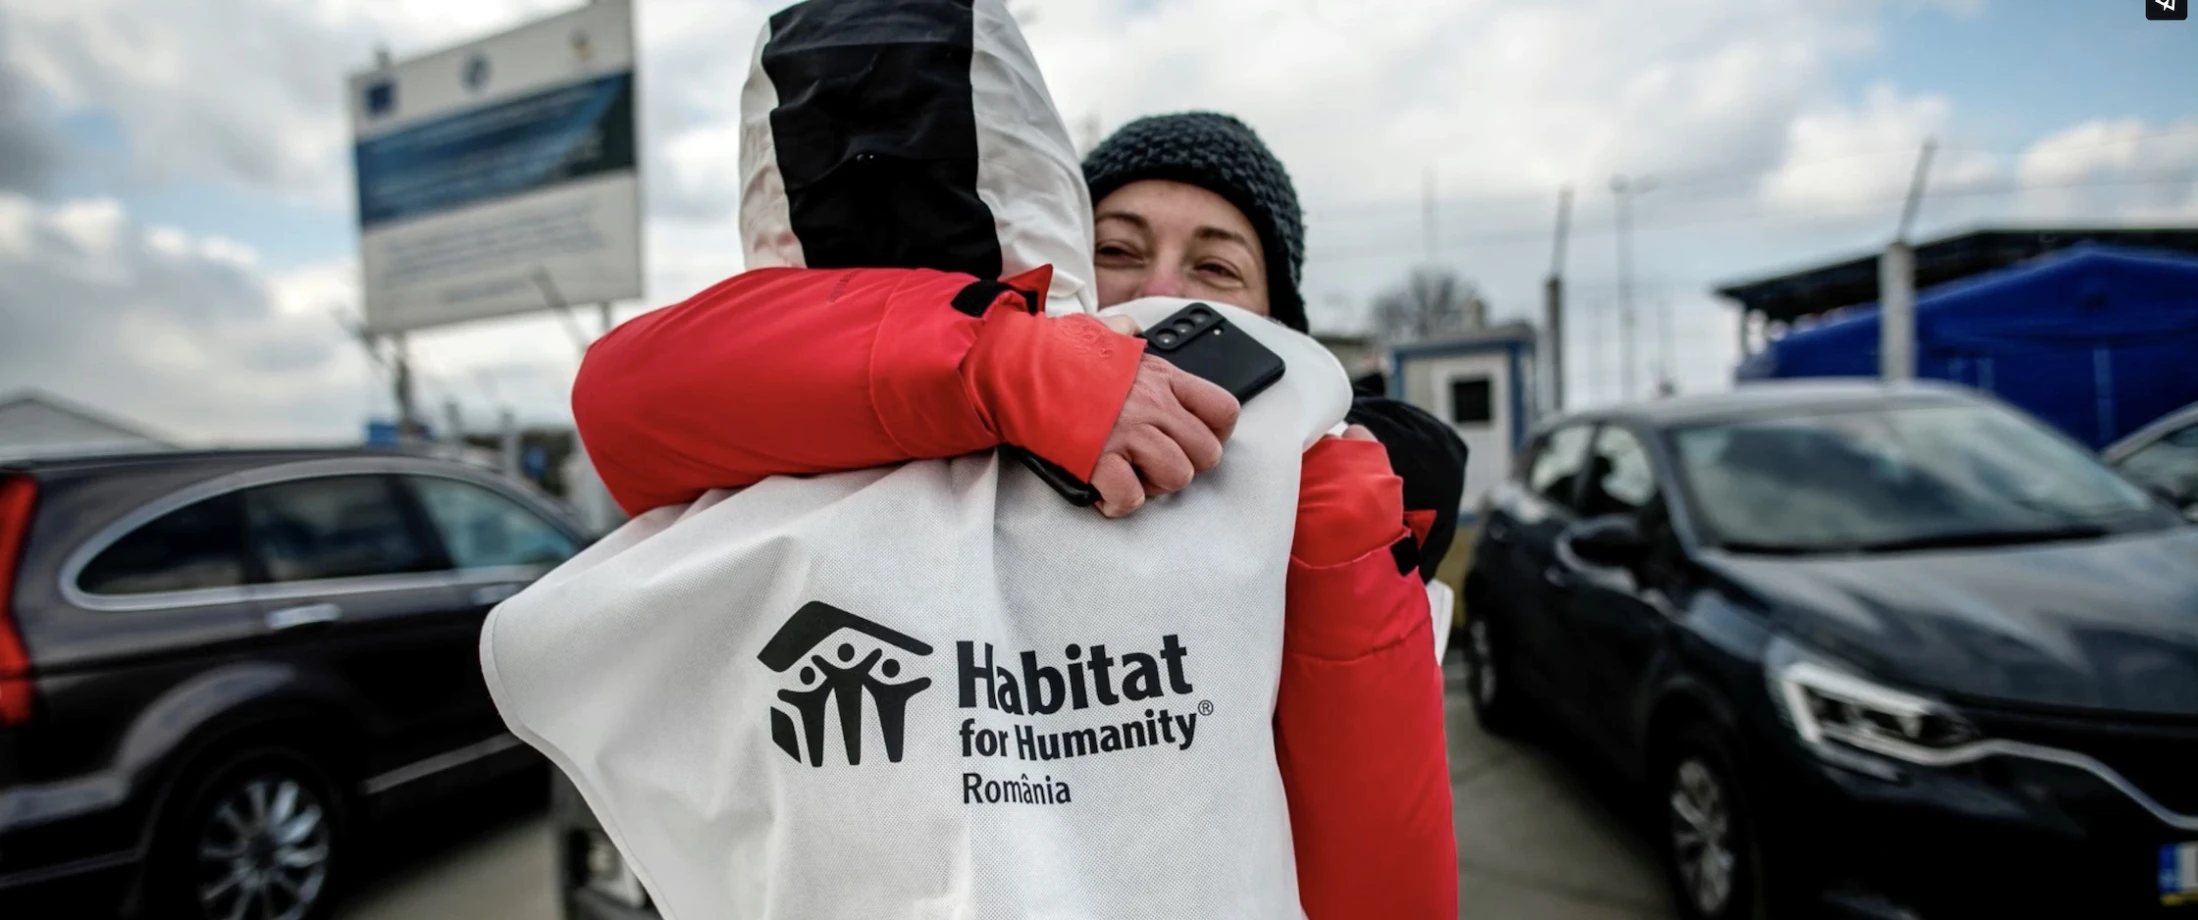 Habitat for Humanity say ‘Thank you’